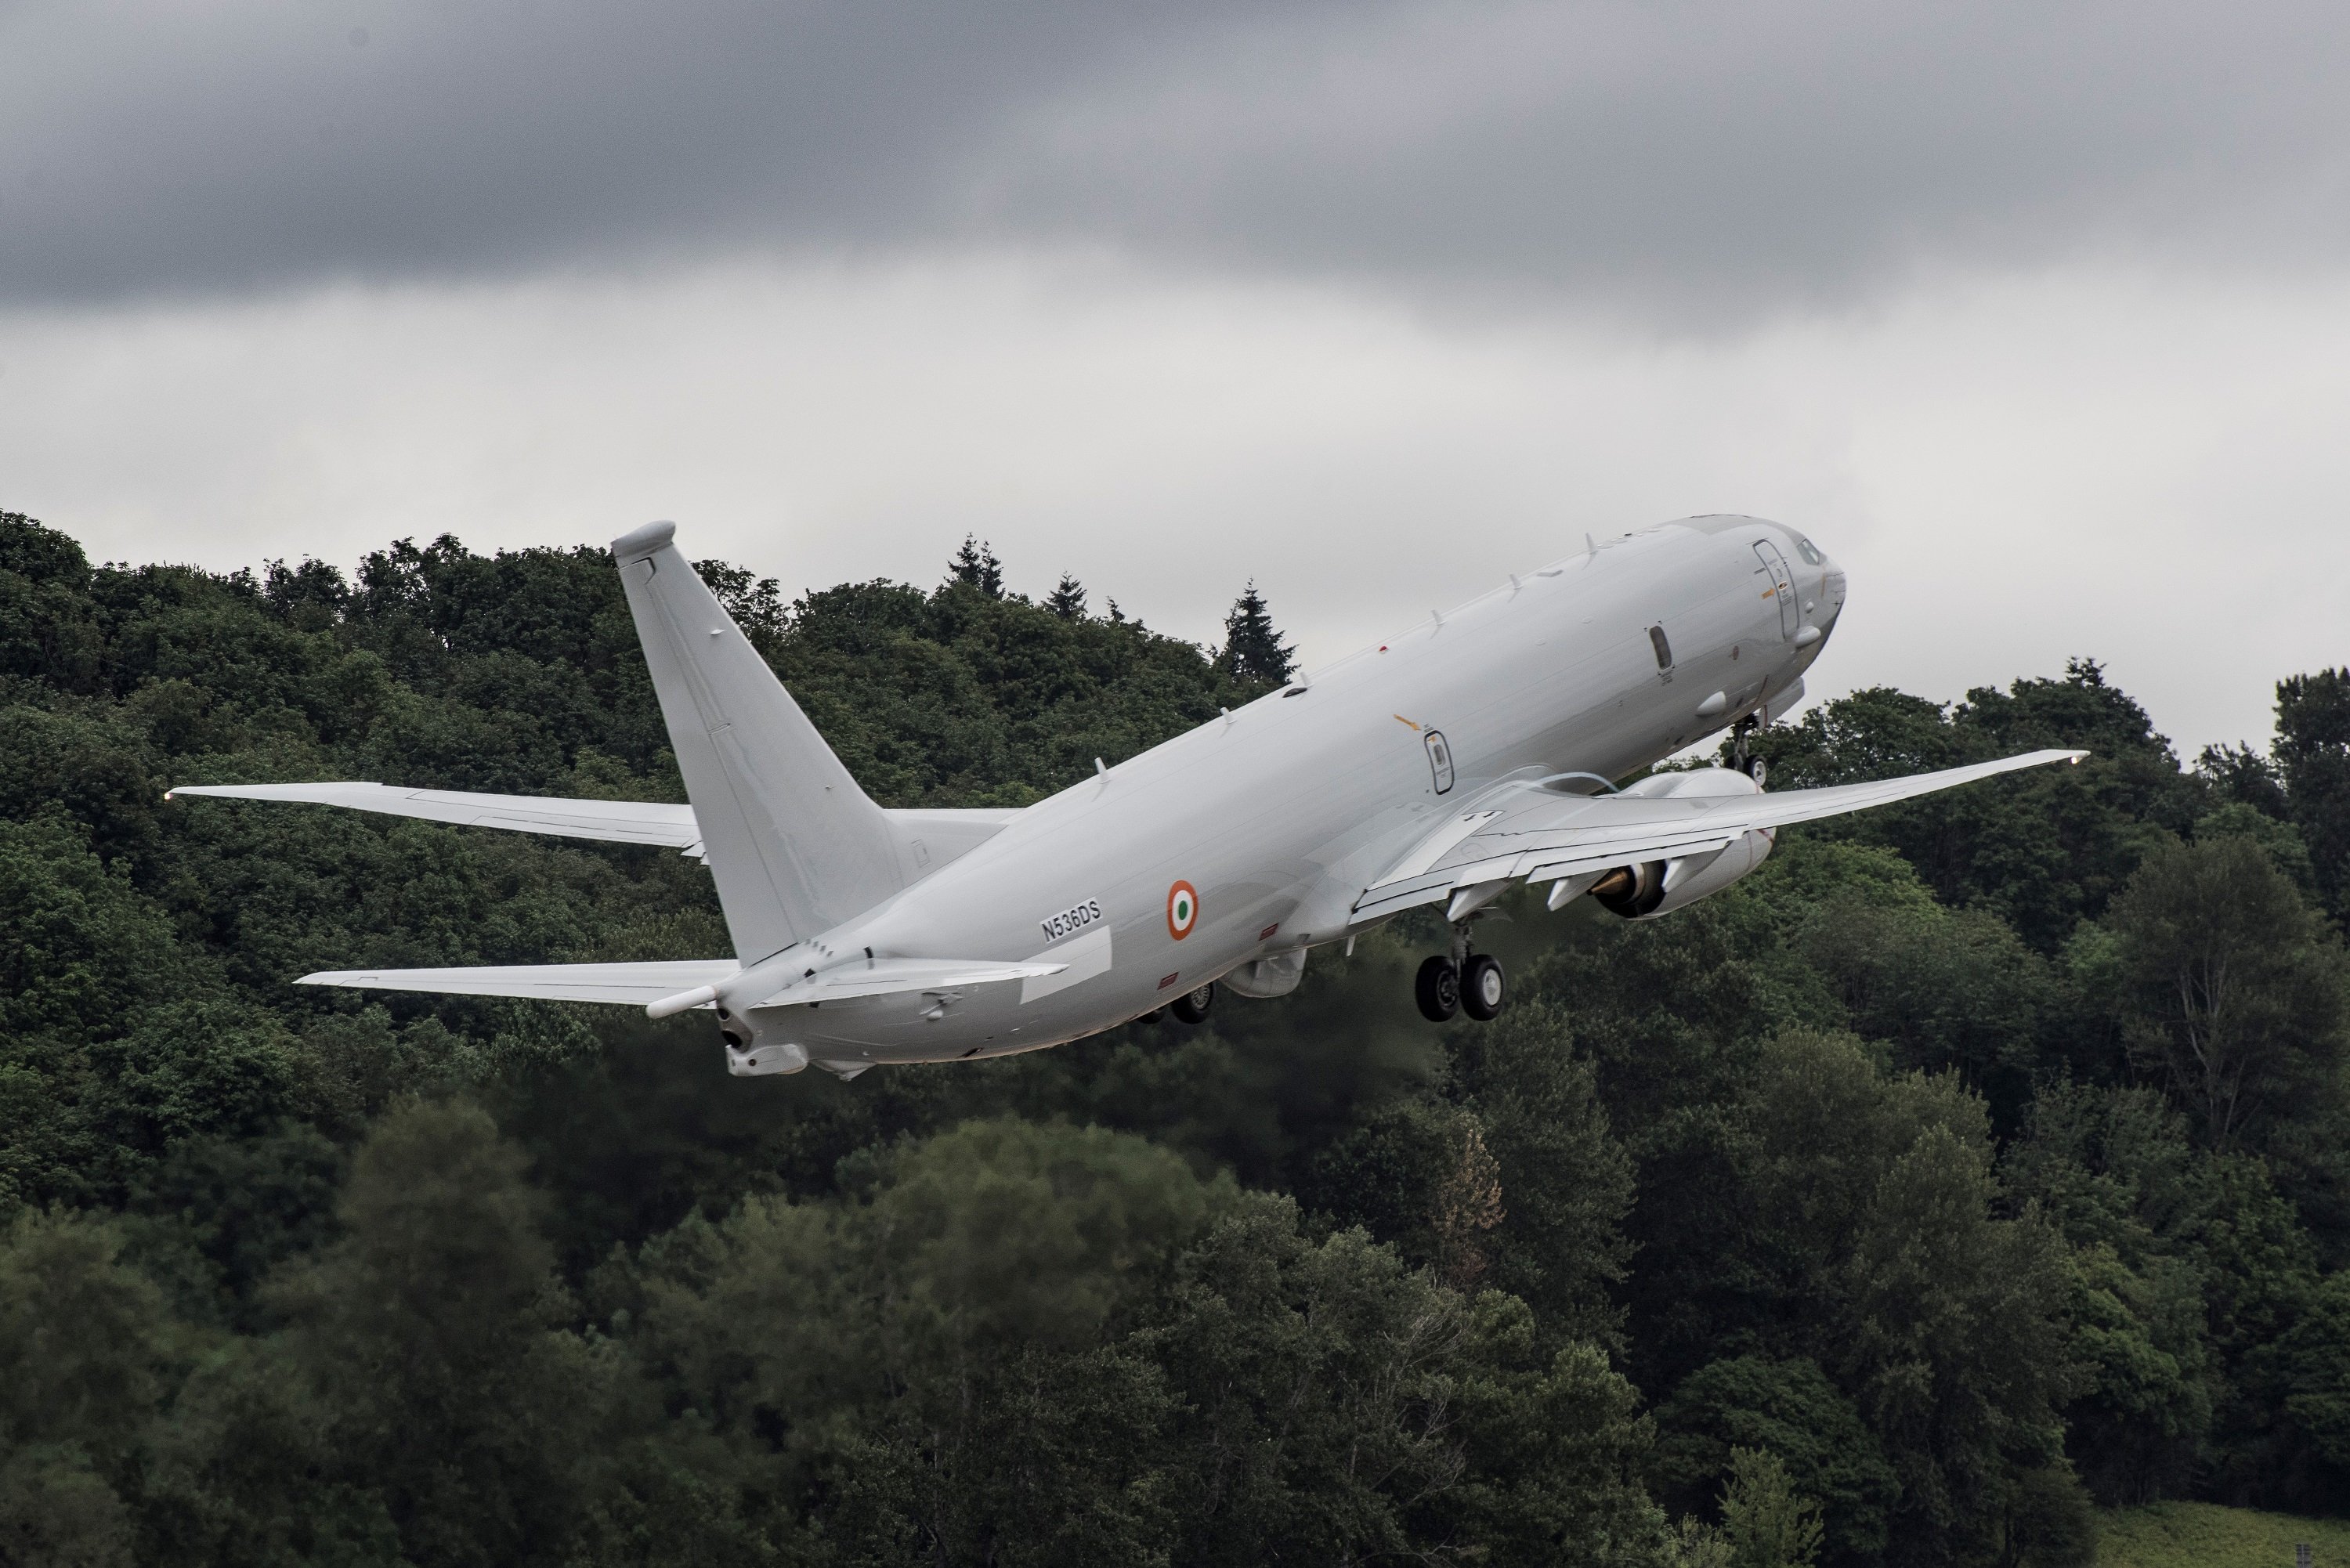 10th P-8I Neptune for Indian Navy departs Boeing Field on 08-07-21 [Boeing]